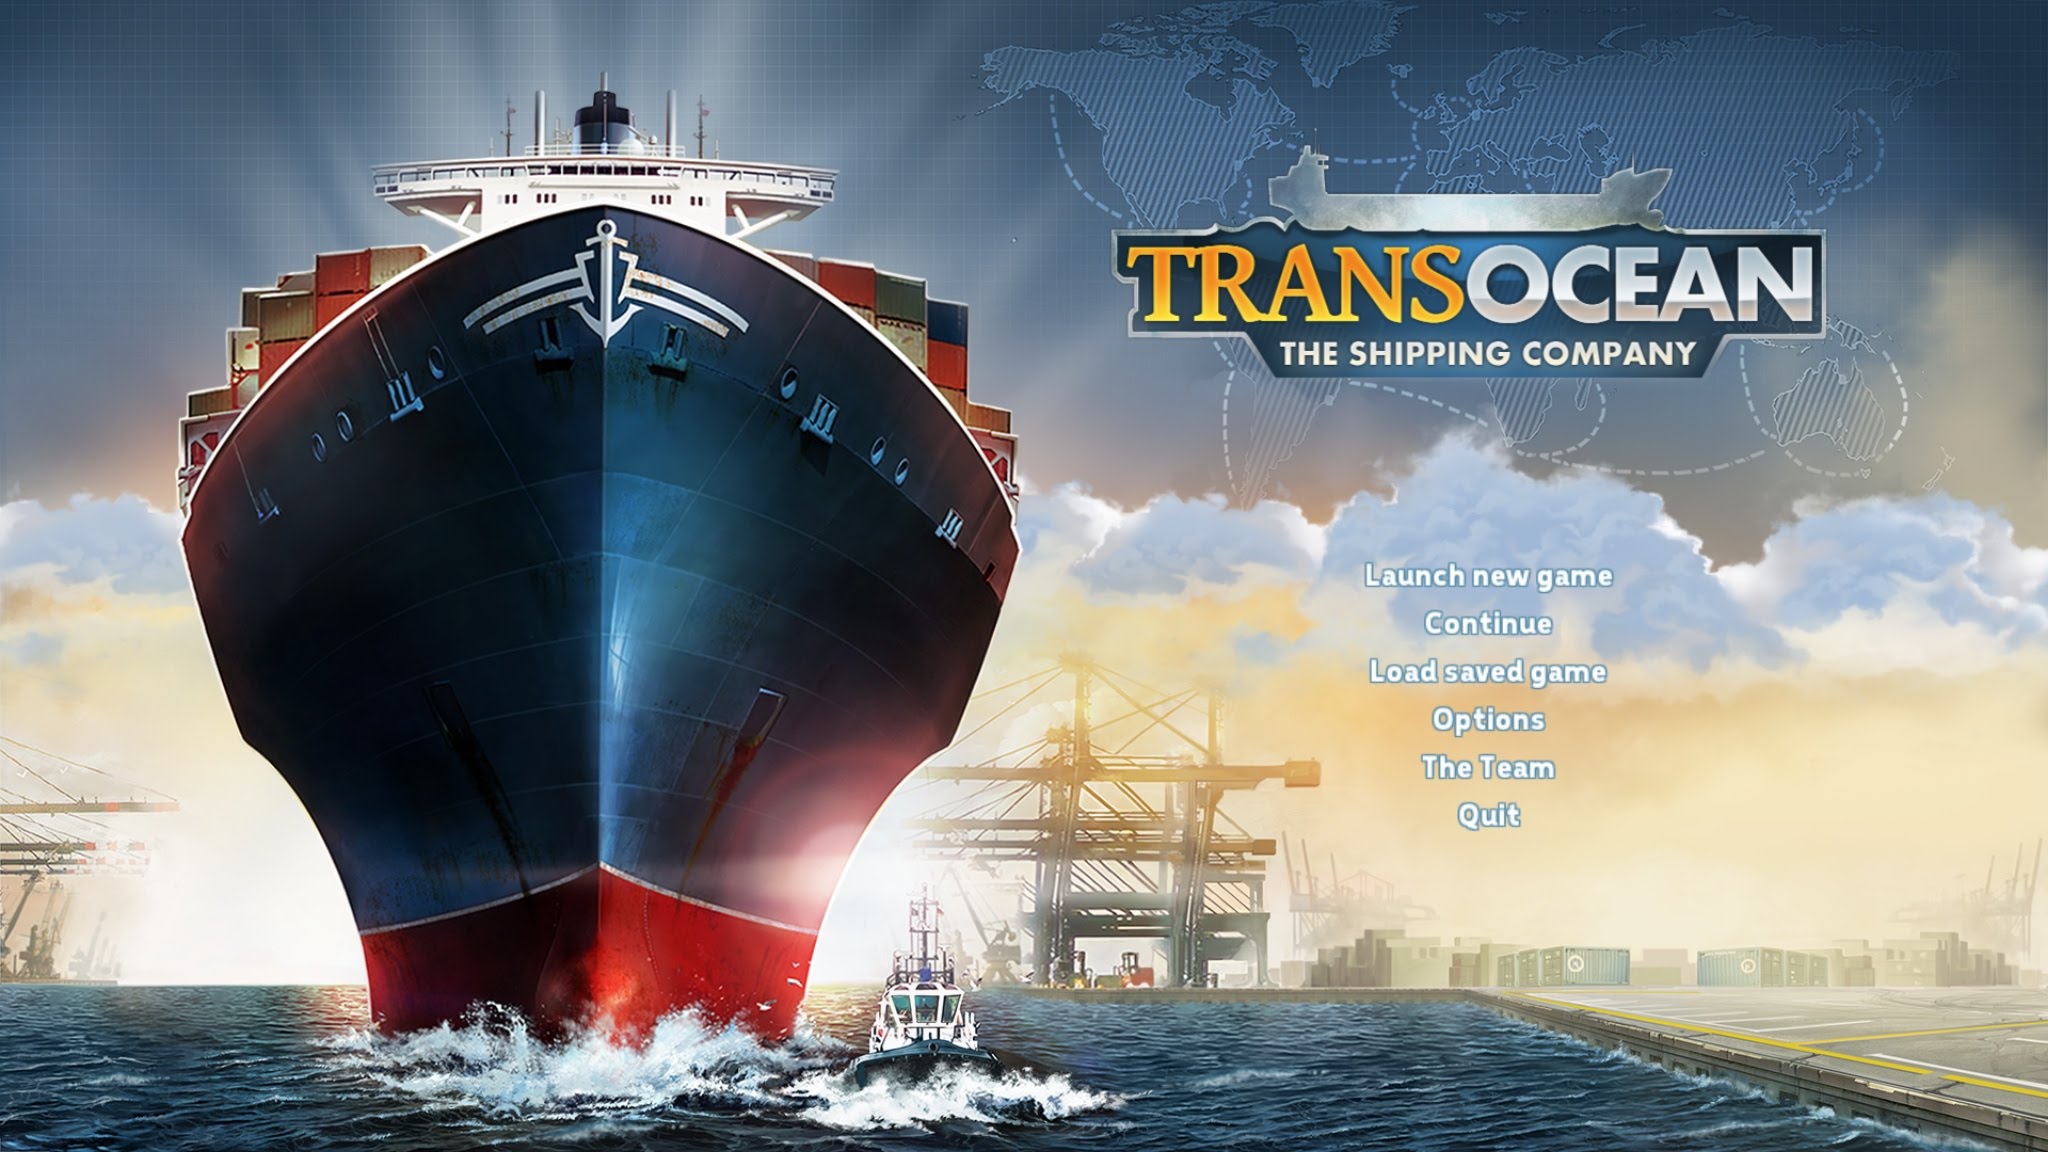 TransOcean The Shipping Company Free Download